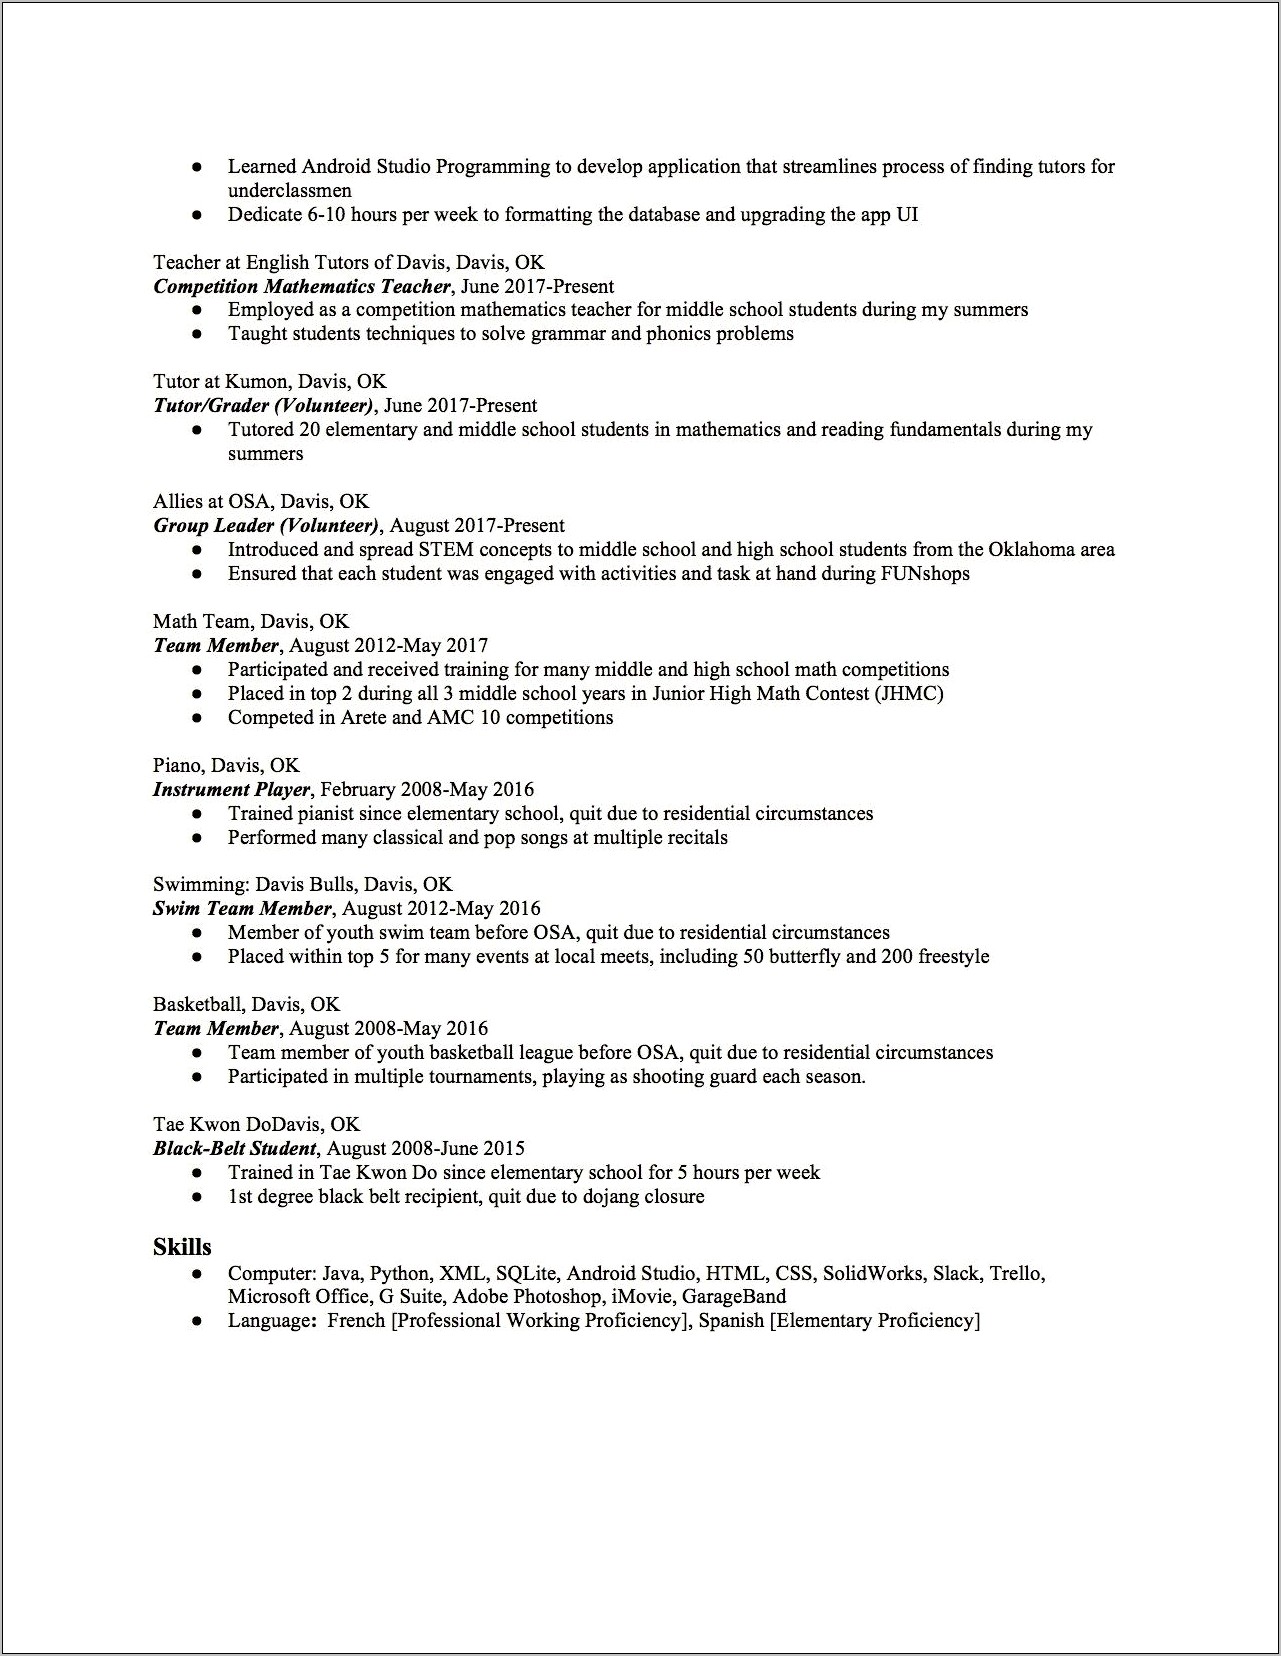 Resumes For People In High School